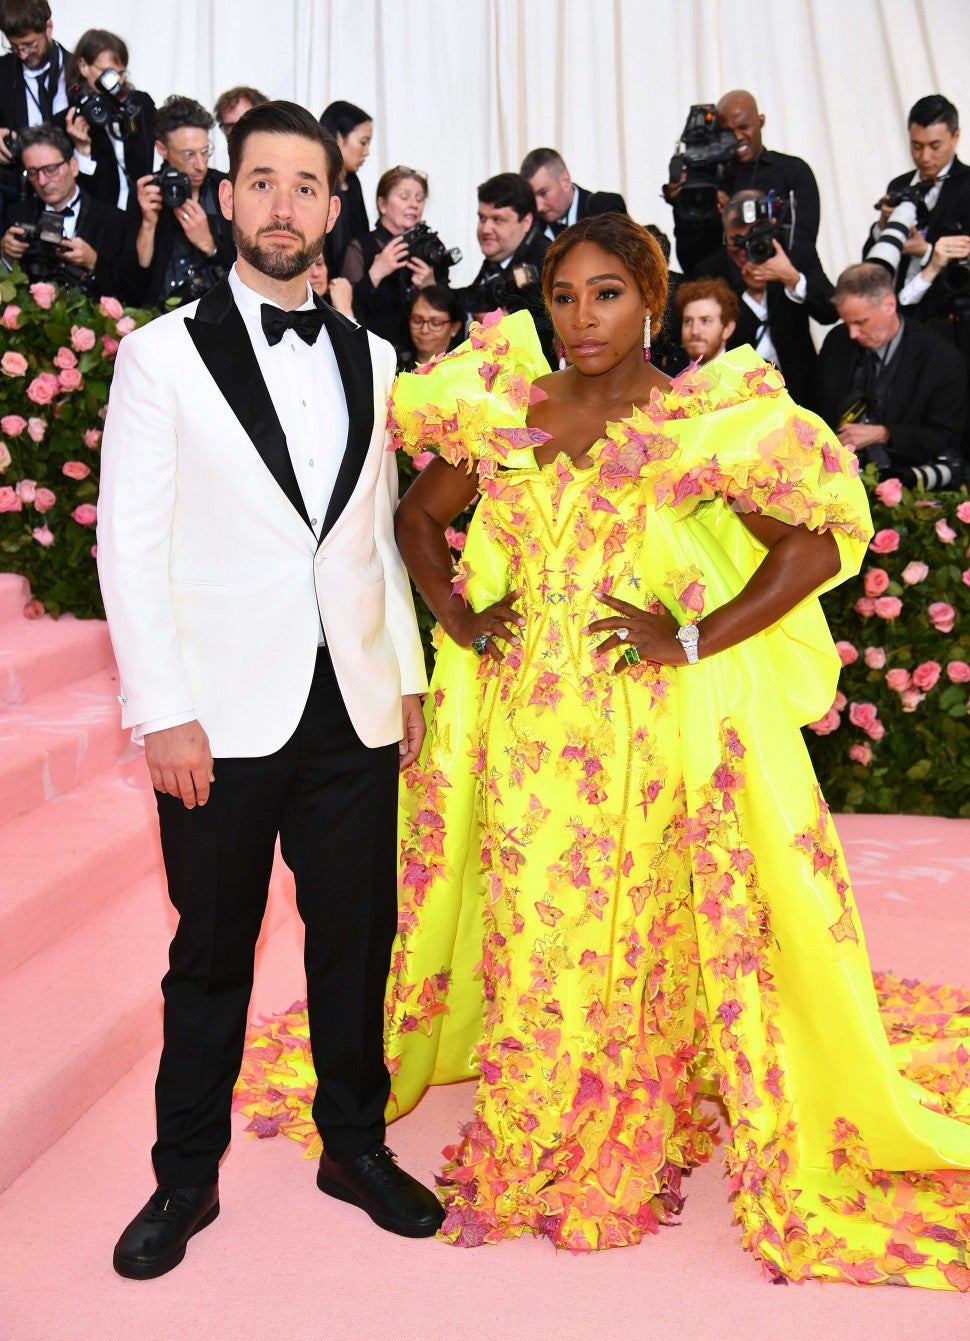 Alexis Ohanian and Serena Williams at the 2019 Met Gala